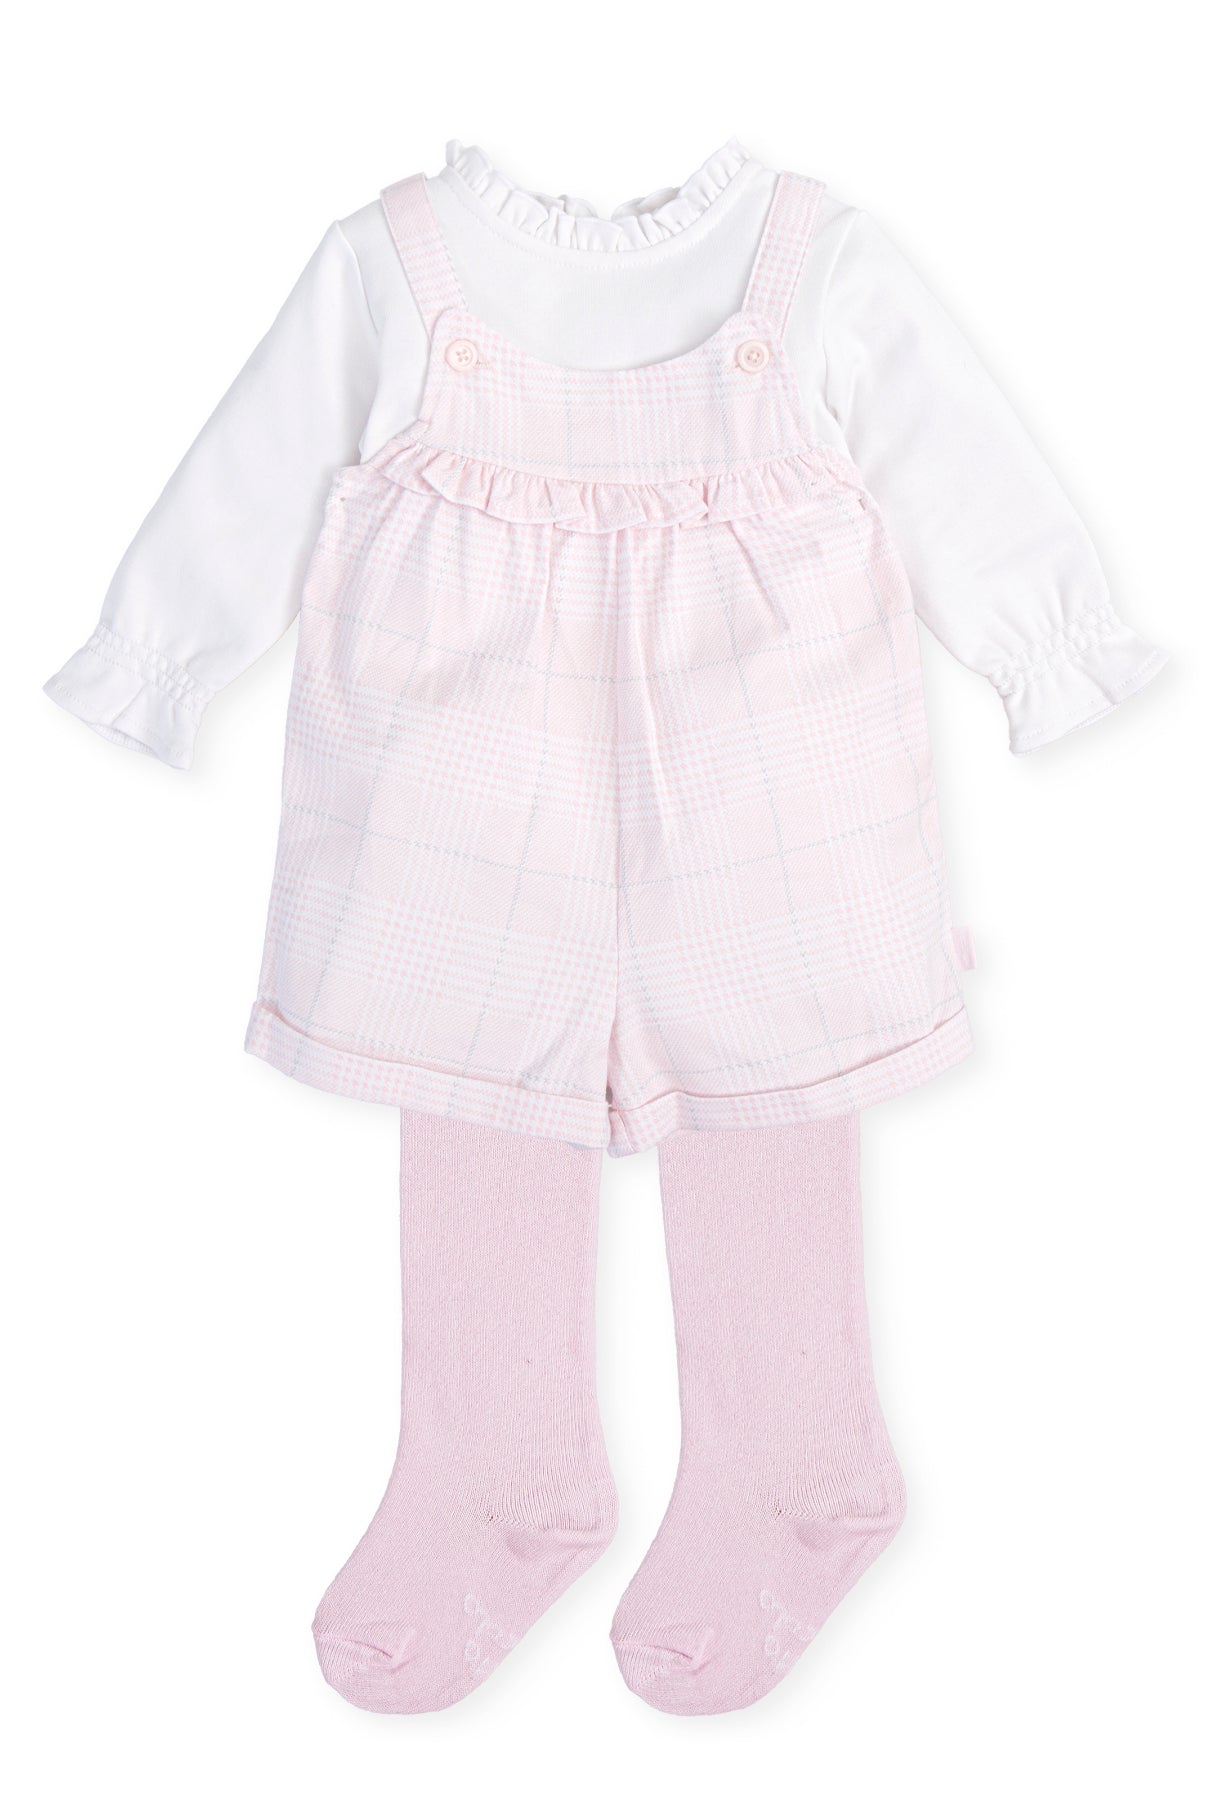 Tutto Piccolo "Ella" Pink Houndstooth Playsuit, Blouse & Tights | Millie and John